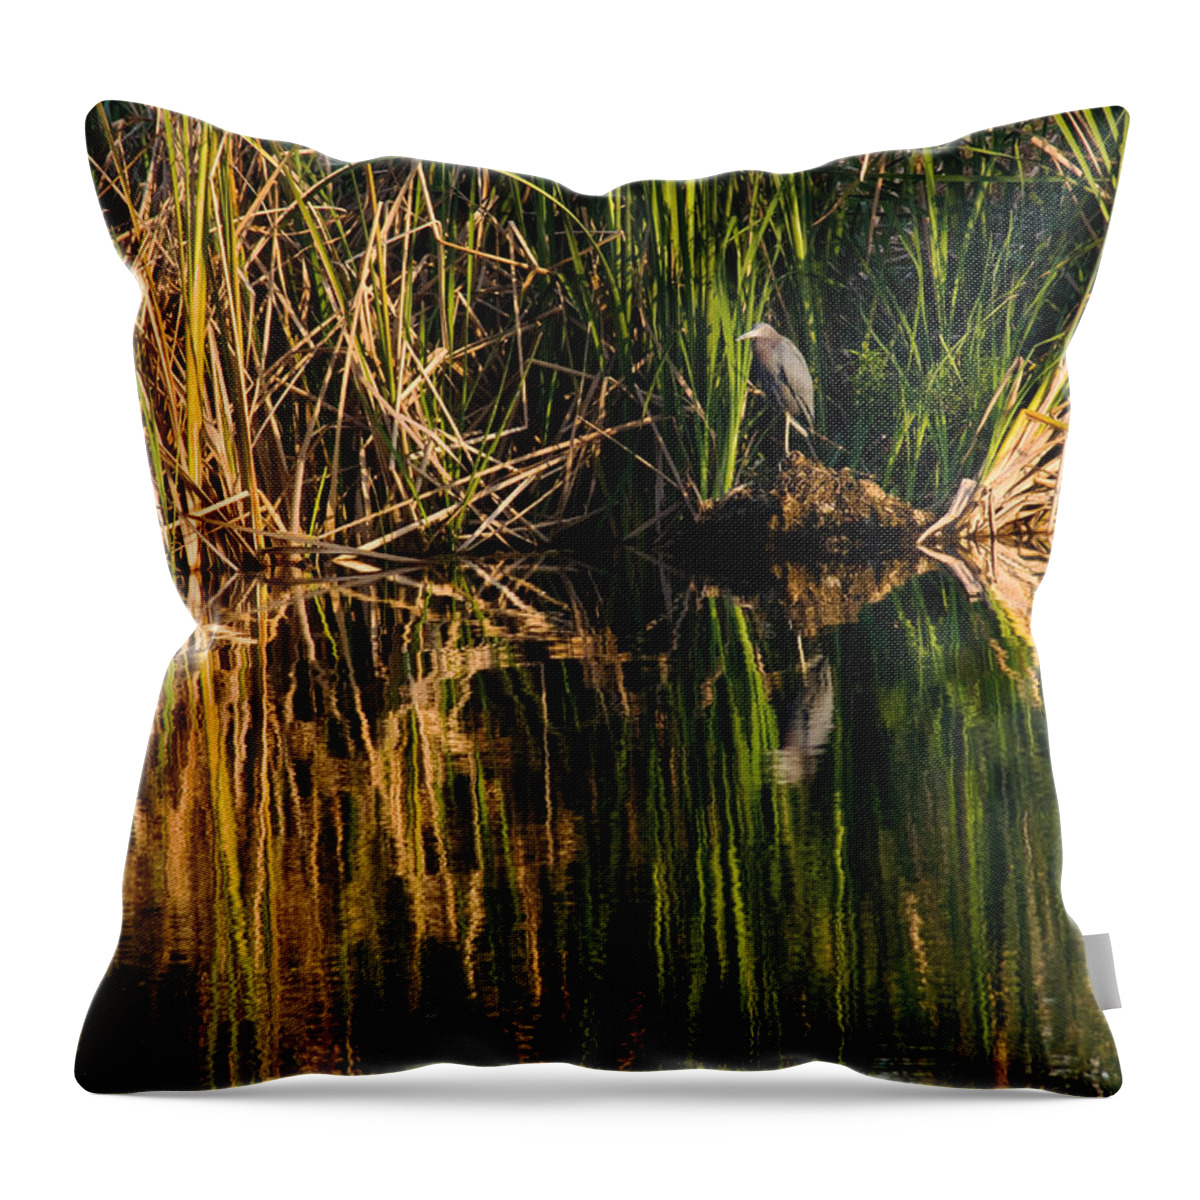 Heron Throw Pillow featuring the photograph Little Blue Heron by Steven Sparks